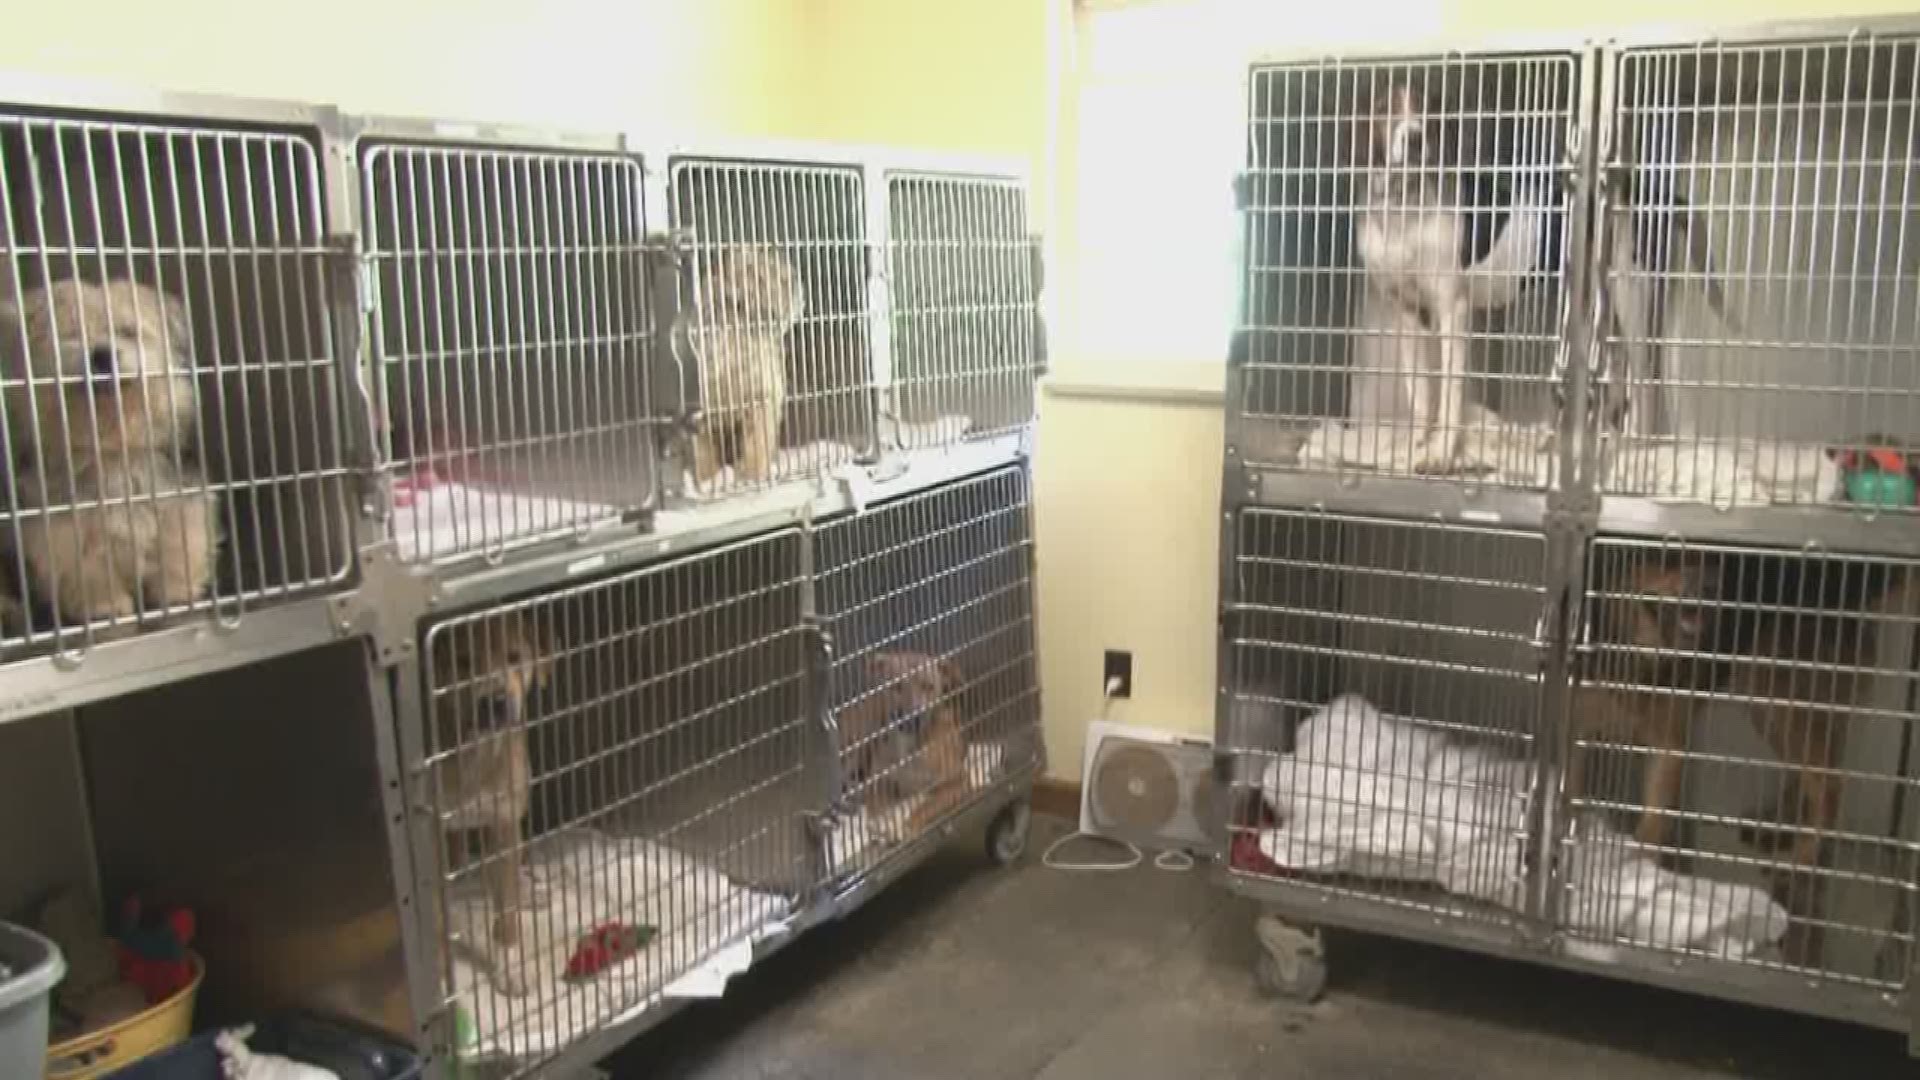 Pets without Parents, the current intake center for the county, was under fire over euthanasia rumors, and admits they need some help.